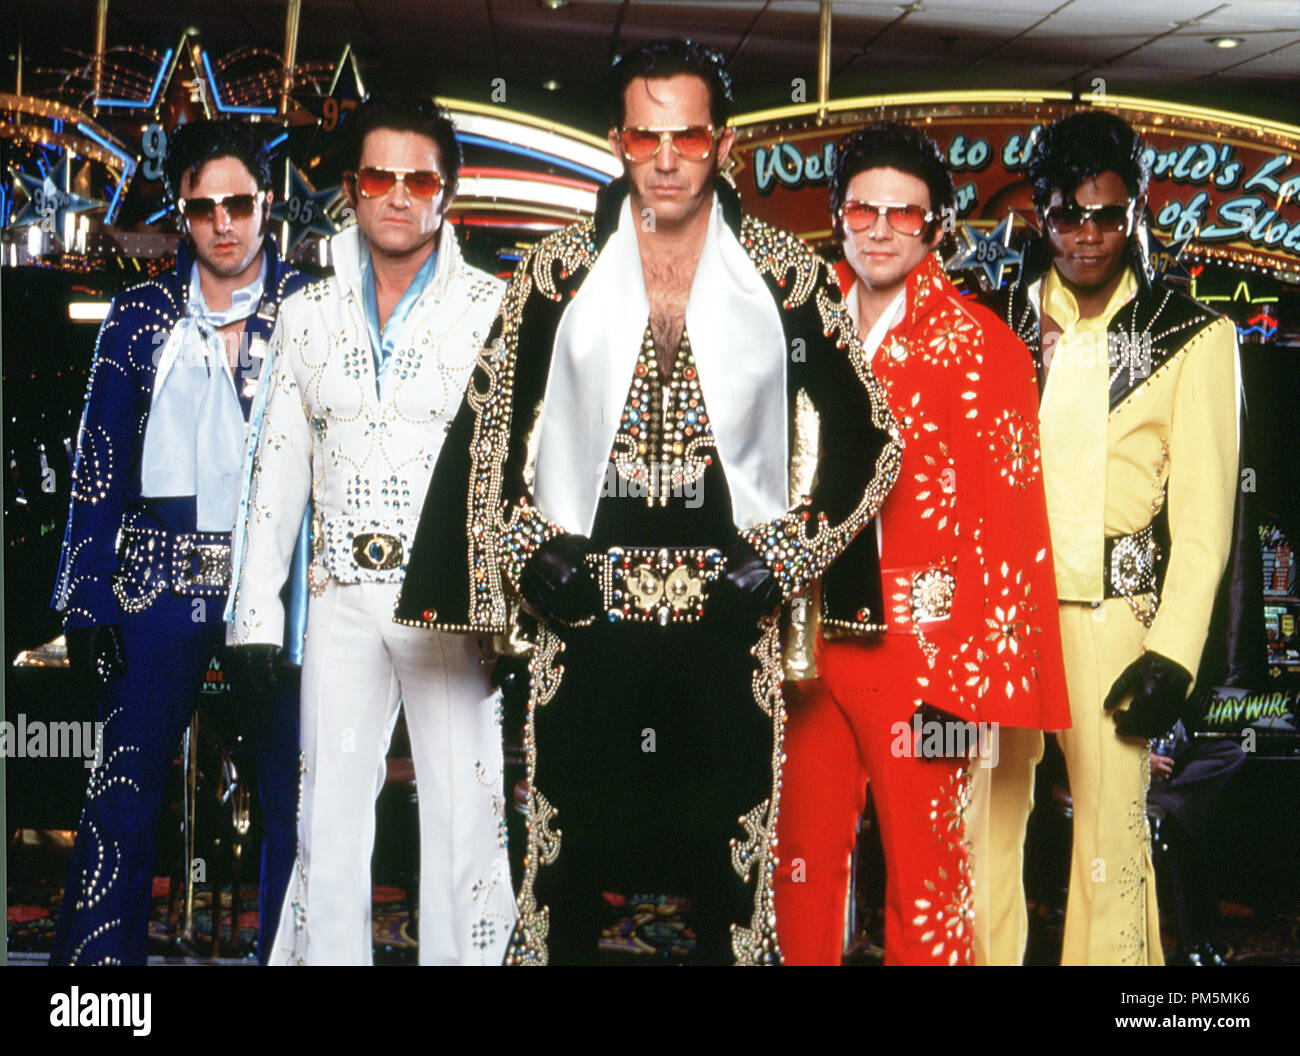 Film Still / Publicity Still from 'Three Thousand Miles to Graceland' David Arquette, Kurt Russell, Kevin Costner, Christian Slater, Bokeem Woodbine © 2001 Warner Brothers Photo credit: Alan Markfield File Reference # 30847057THA  For Editorial Use Only -  All Rights Reserved Stock Photo